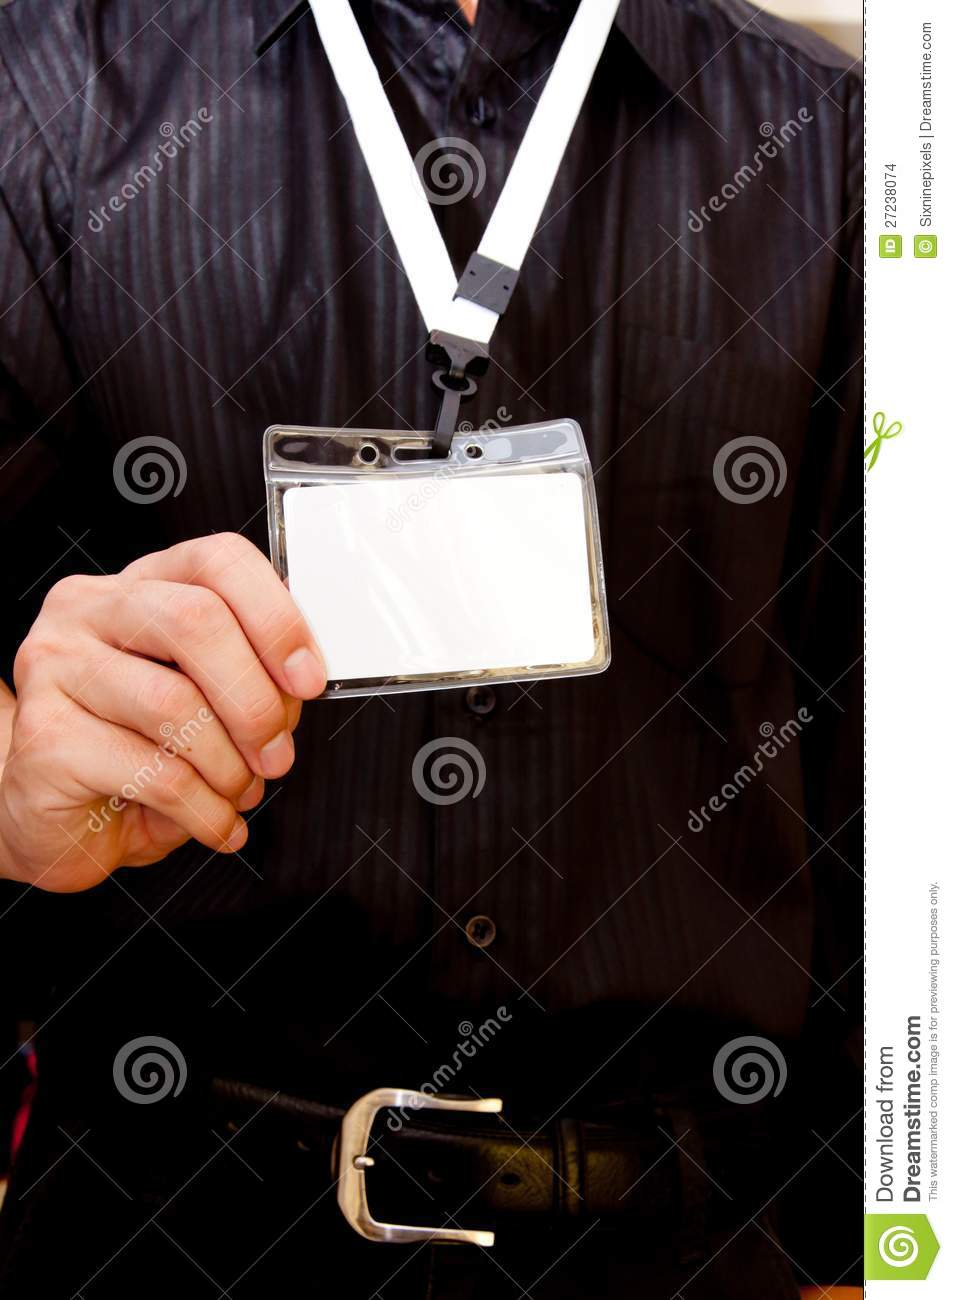 Employee Card Stock Images   Image  27238074